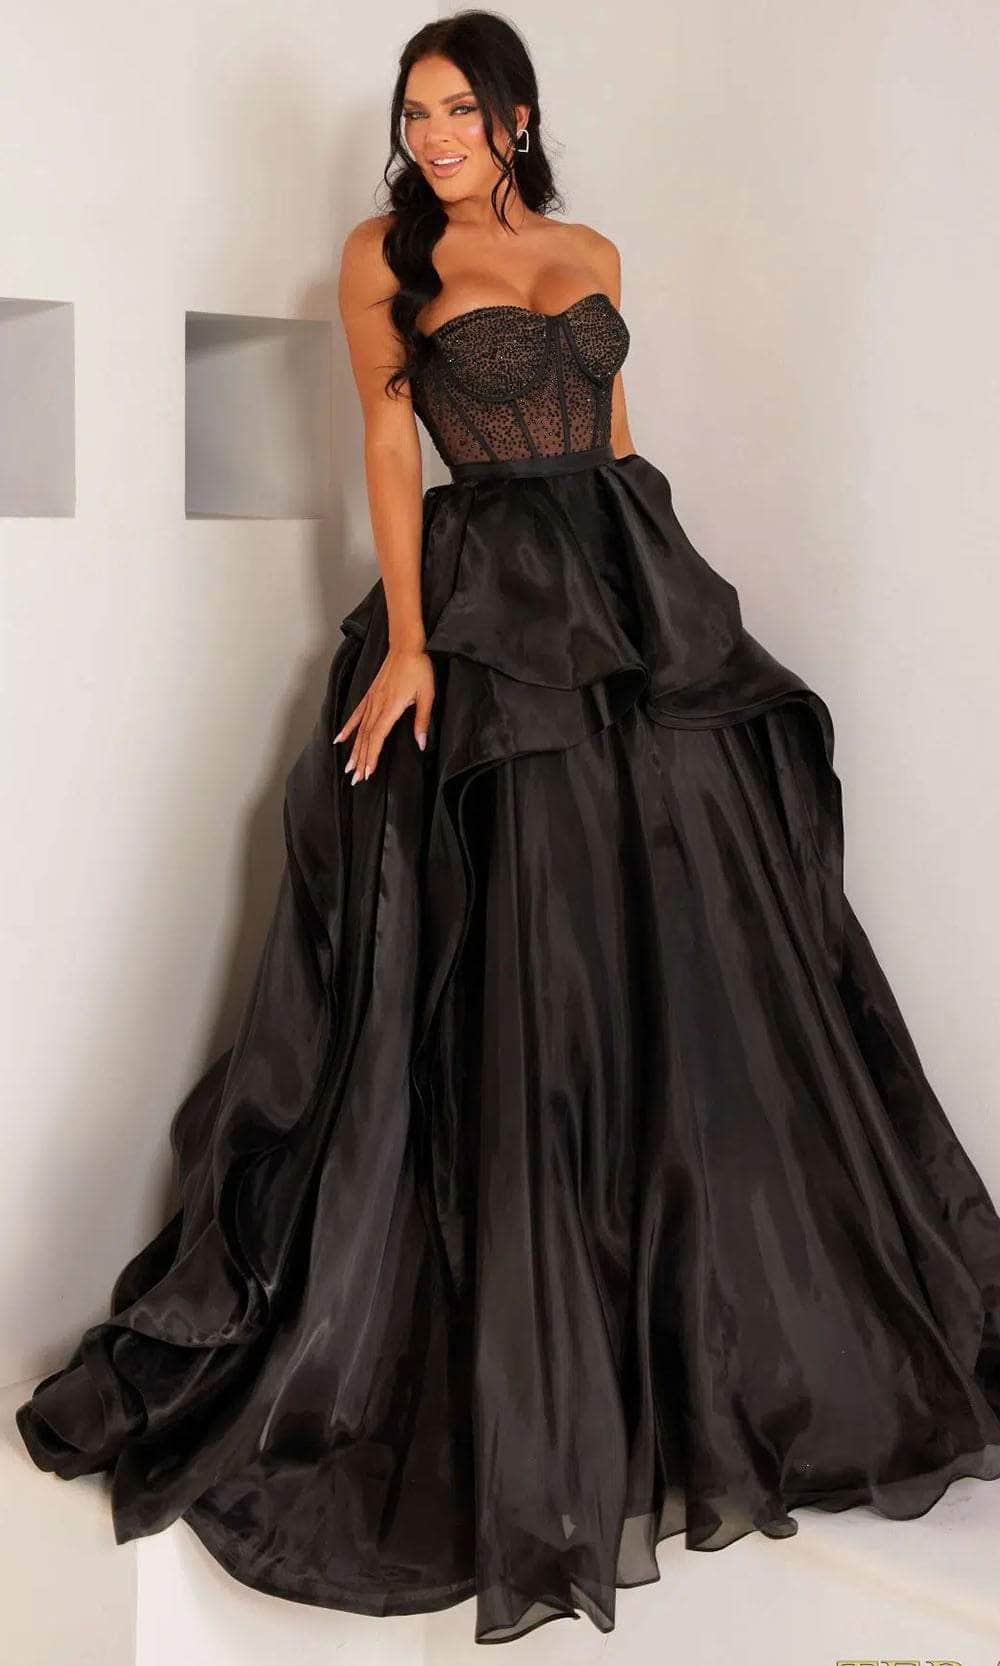 Image of Terani Couture 241P2209 - Embellished Heat Set Stone Sweetheart Neckline Ballgown